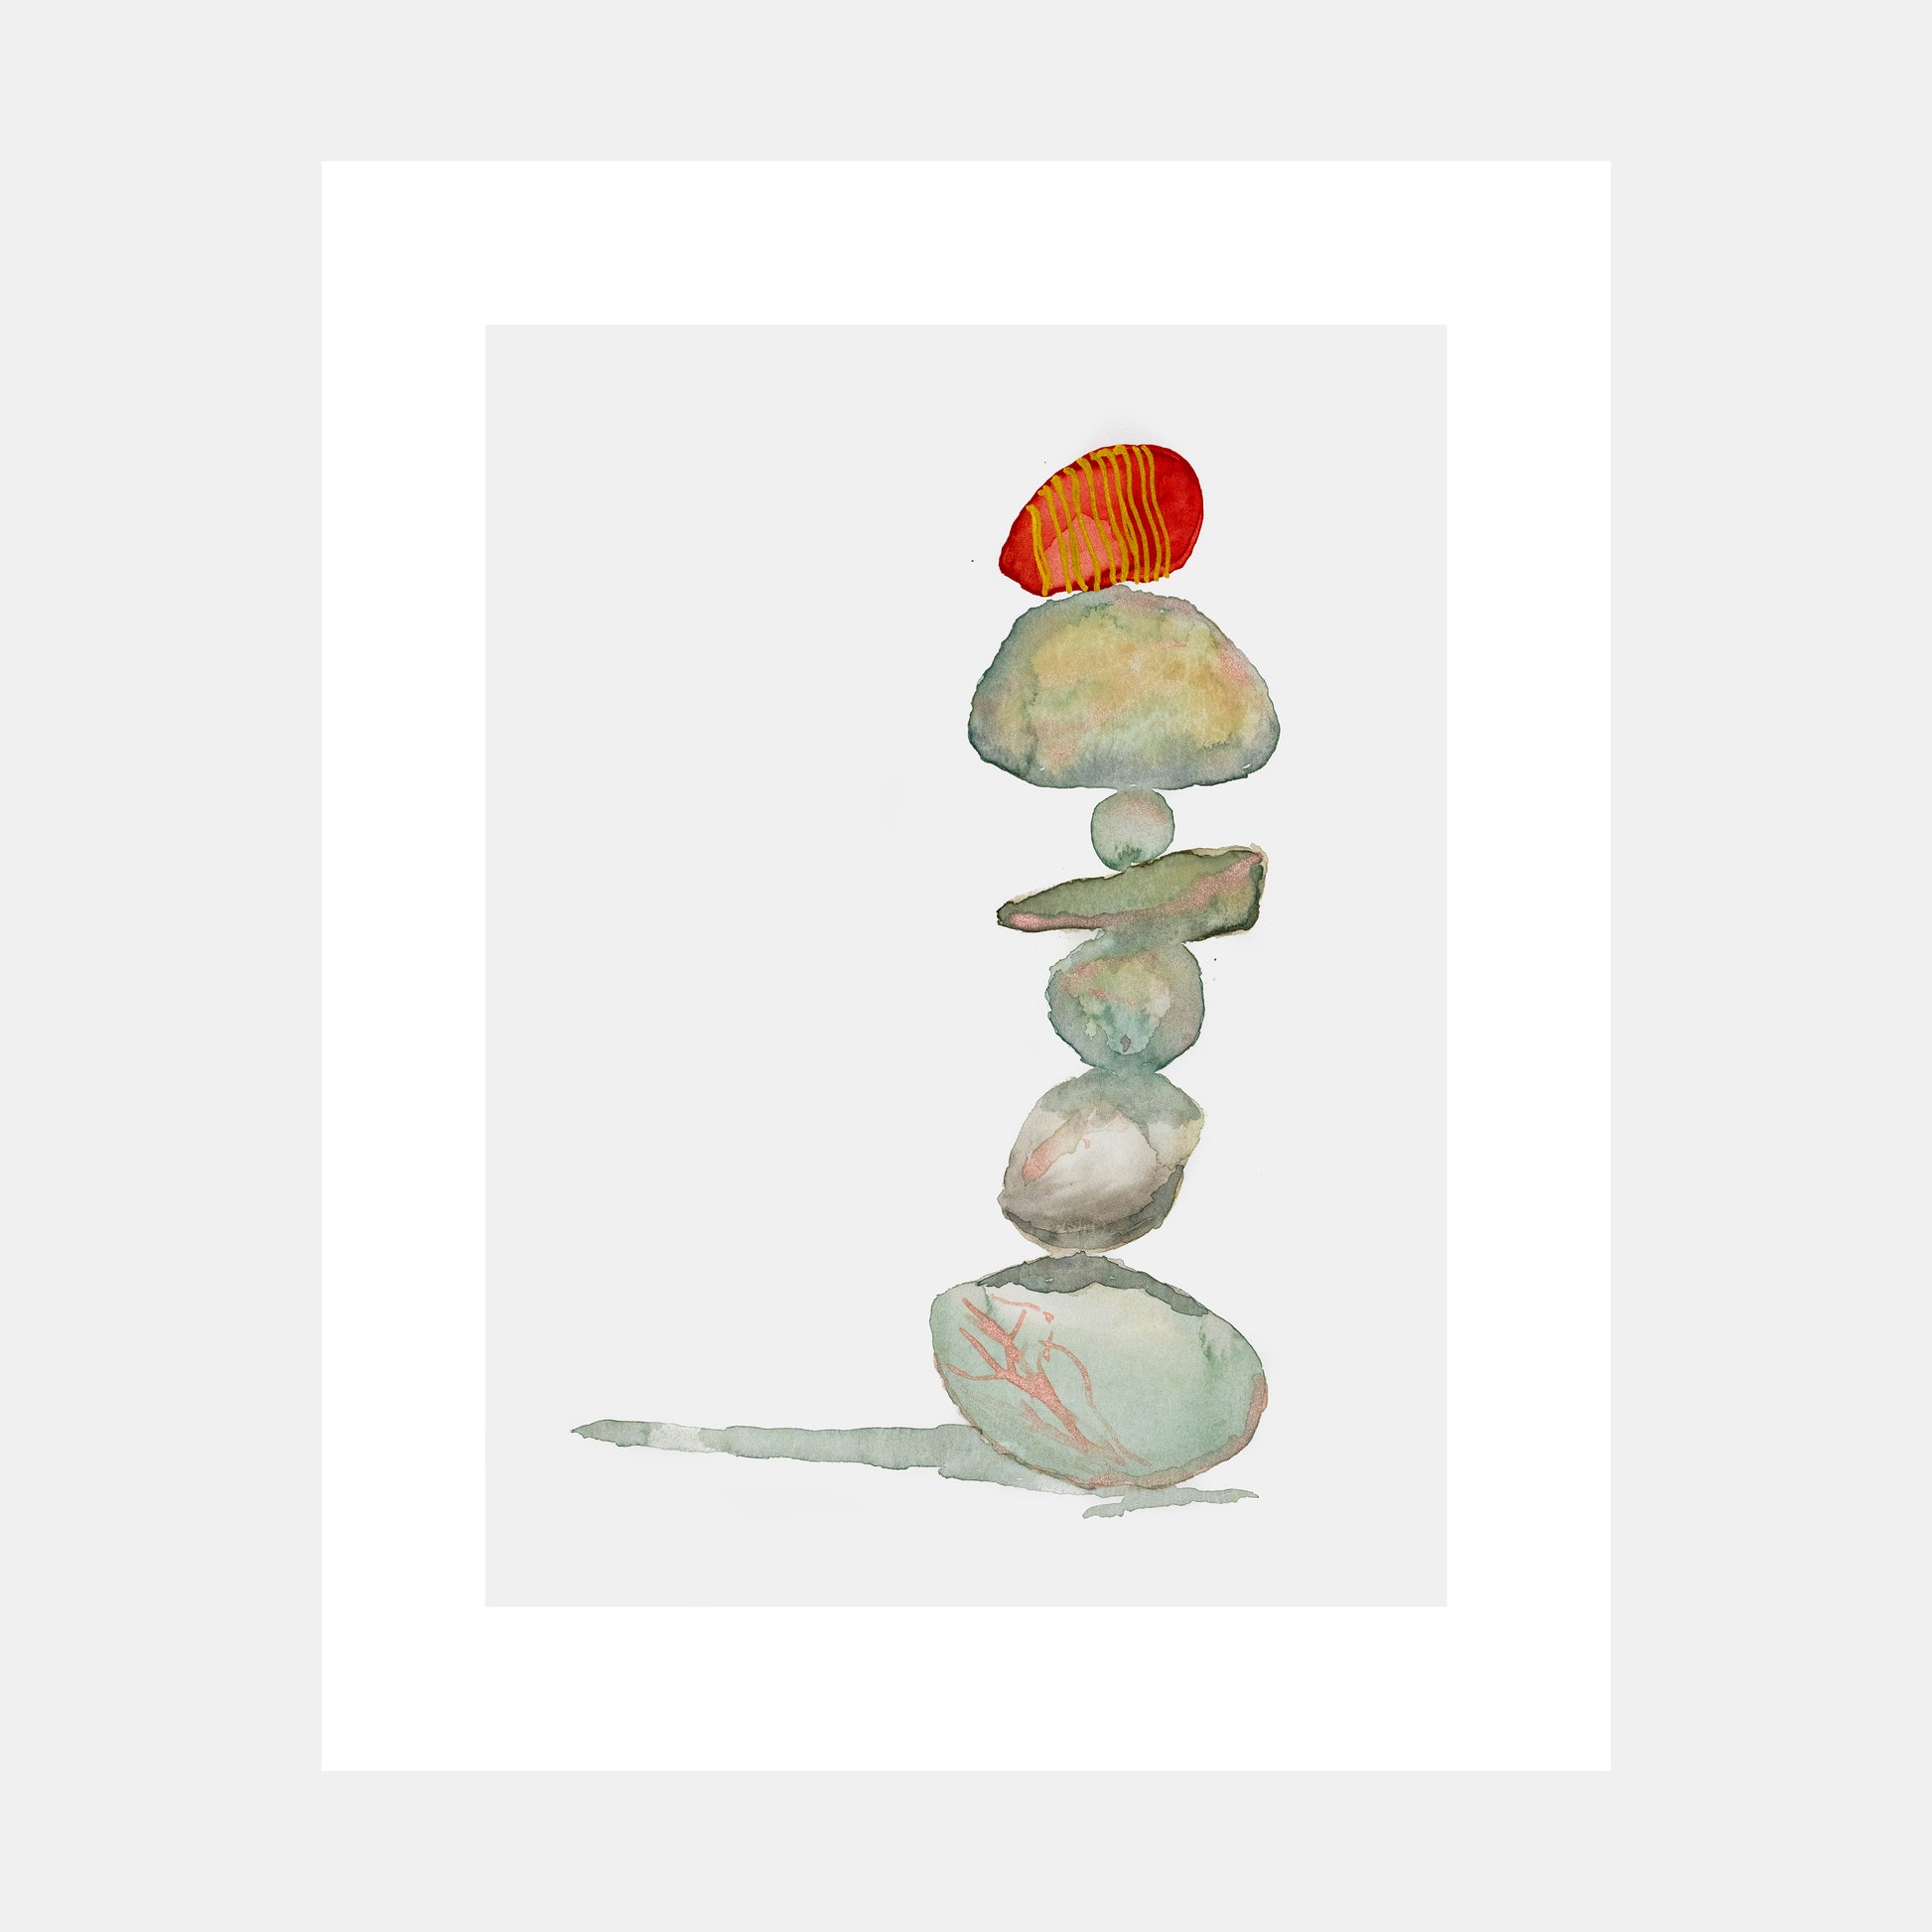 "Make The Connection" Watercolor Print by Teresa Bacon - 8x10 inches by Teresa Bacon - K. A. Artist Shop